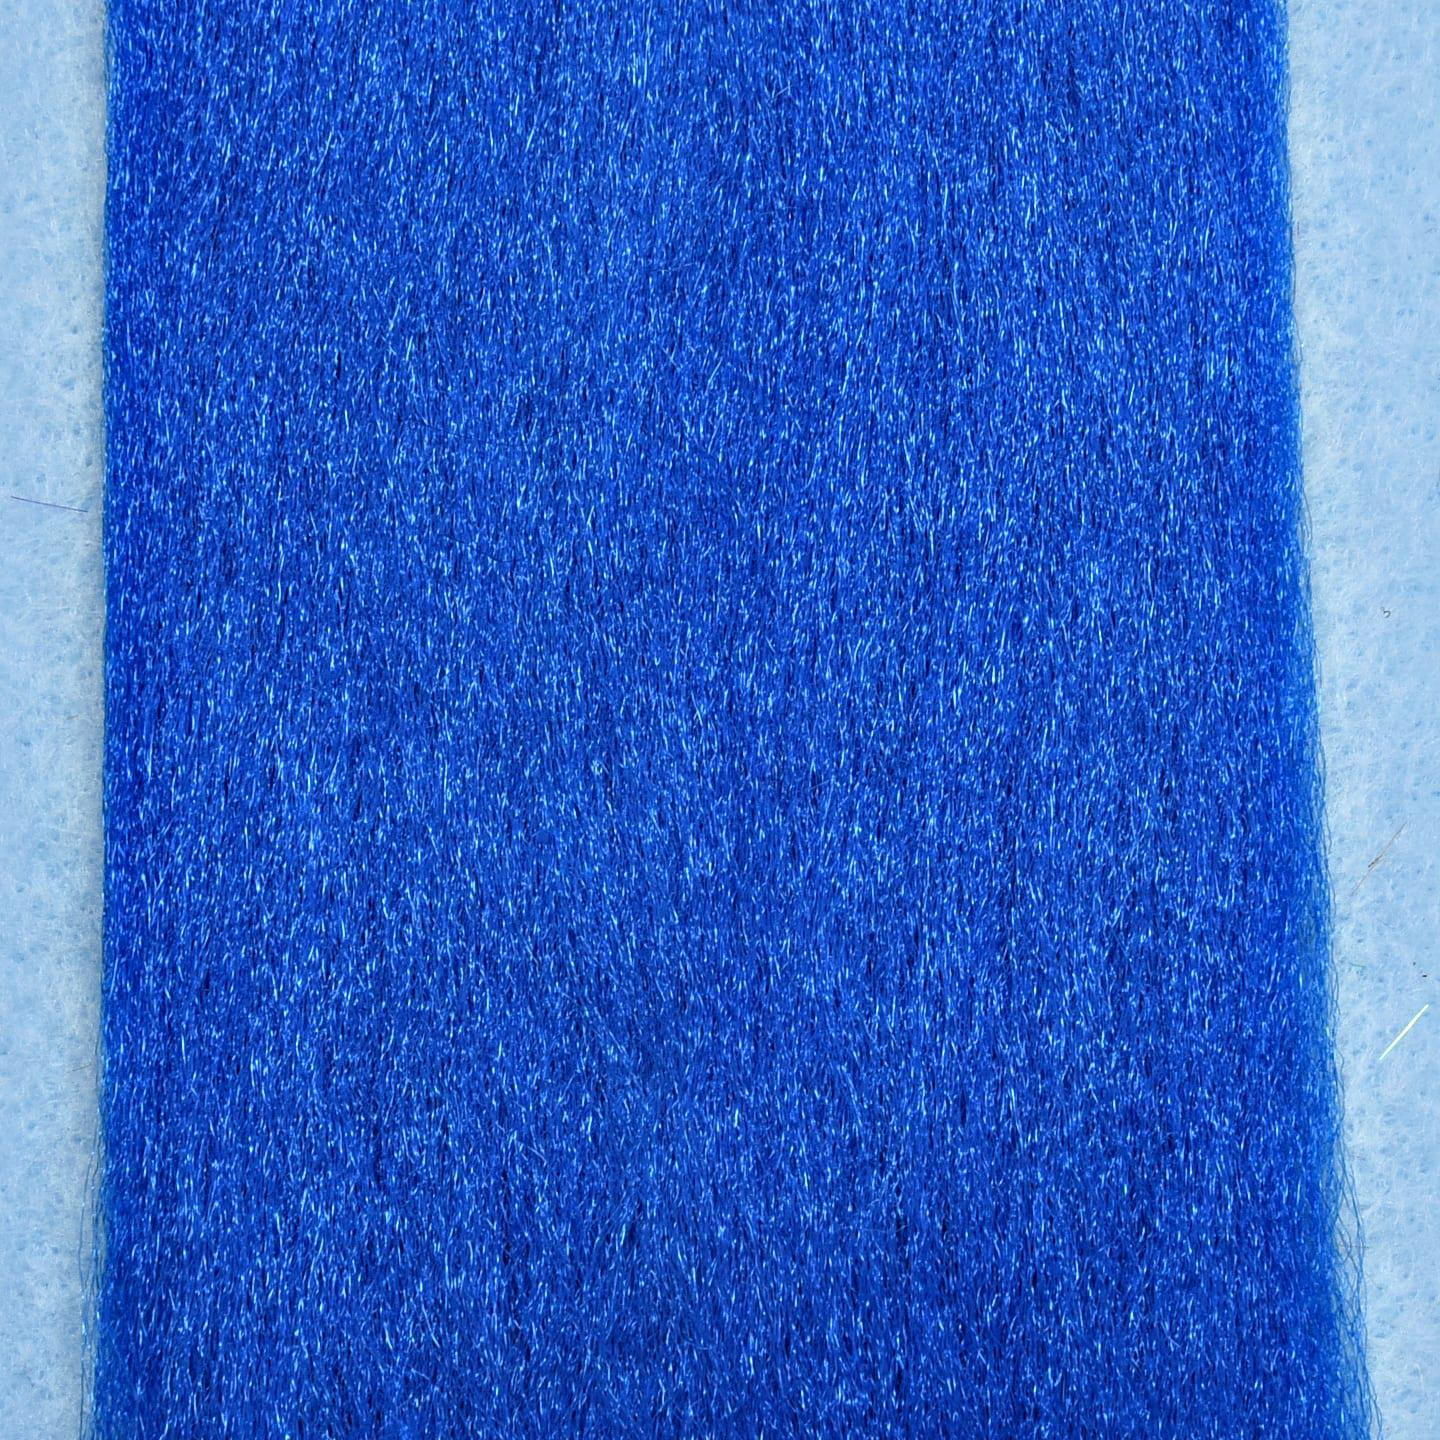 Enrico Puglisi Fibres-Fly Fishing - Fly Tying Material-Enrico Puglisi-Royal Blue-Fishing Station